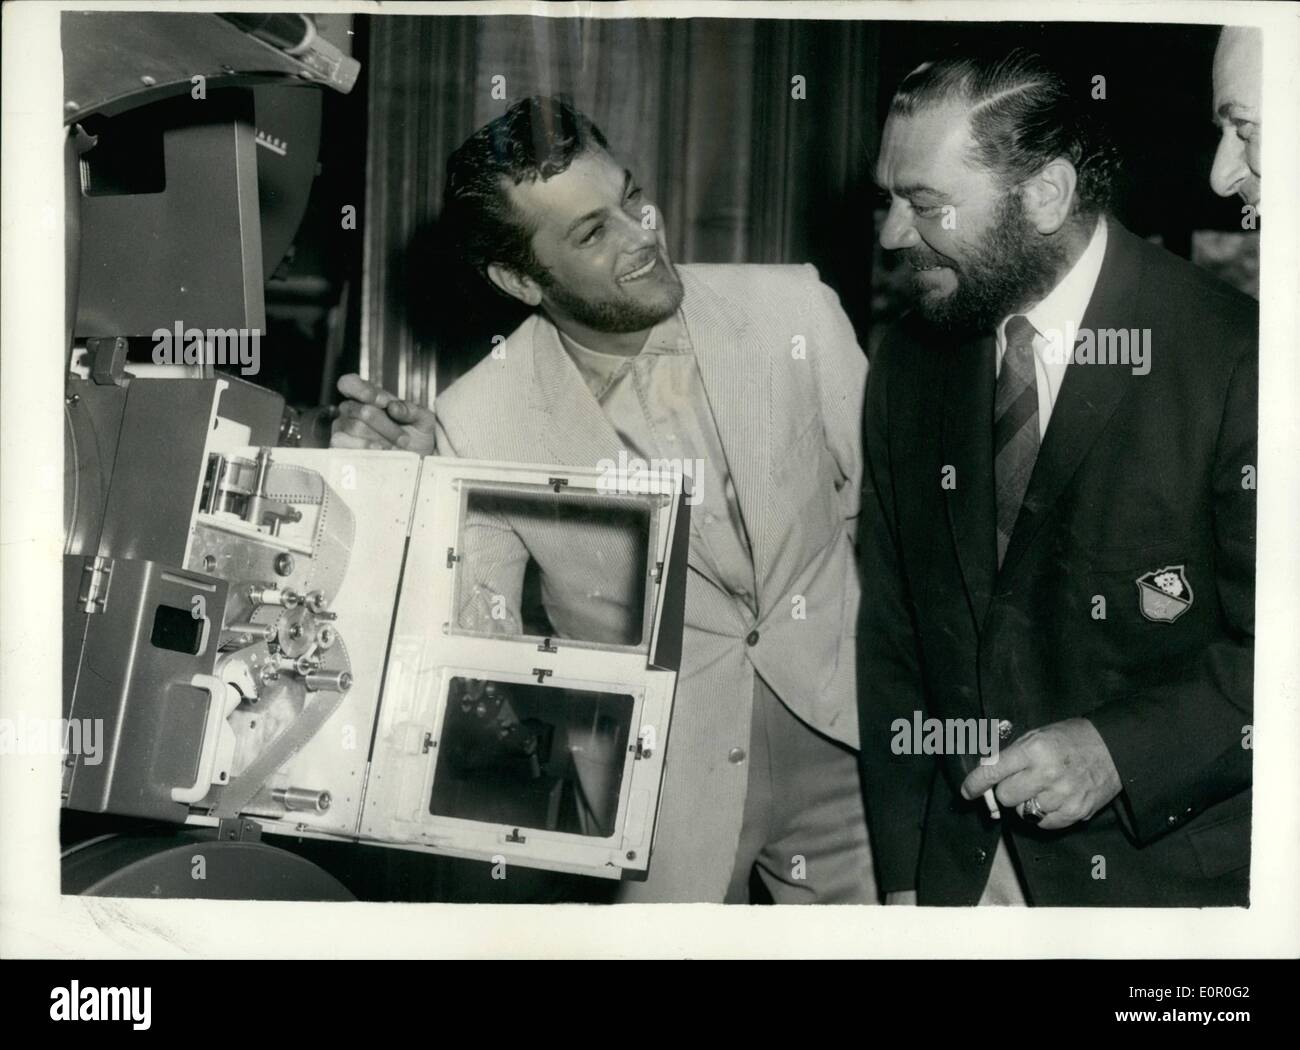 Jun. 06, 1957 - Stars Attend Demonstration of New Technicolor System.. Tony And Ernest - Complete With Beards.. A number of well known stars of the screen attended the demonstration at the Odeon Cinema, Leicester Square of ''Technirama'' - a new Technicolour process - a revolution in the film industry. Keystone Photo Shows: L-R:- Tony Curtis and Ernest Borgnine complete with beard - discuss the meruts of the Technirama projection system - at the Theatre. Stock Photo